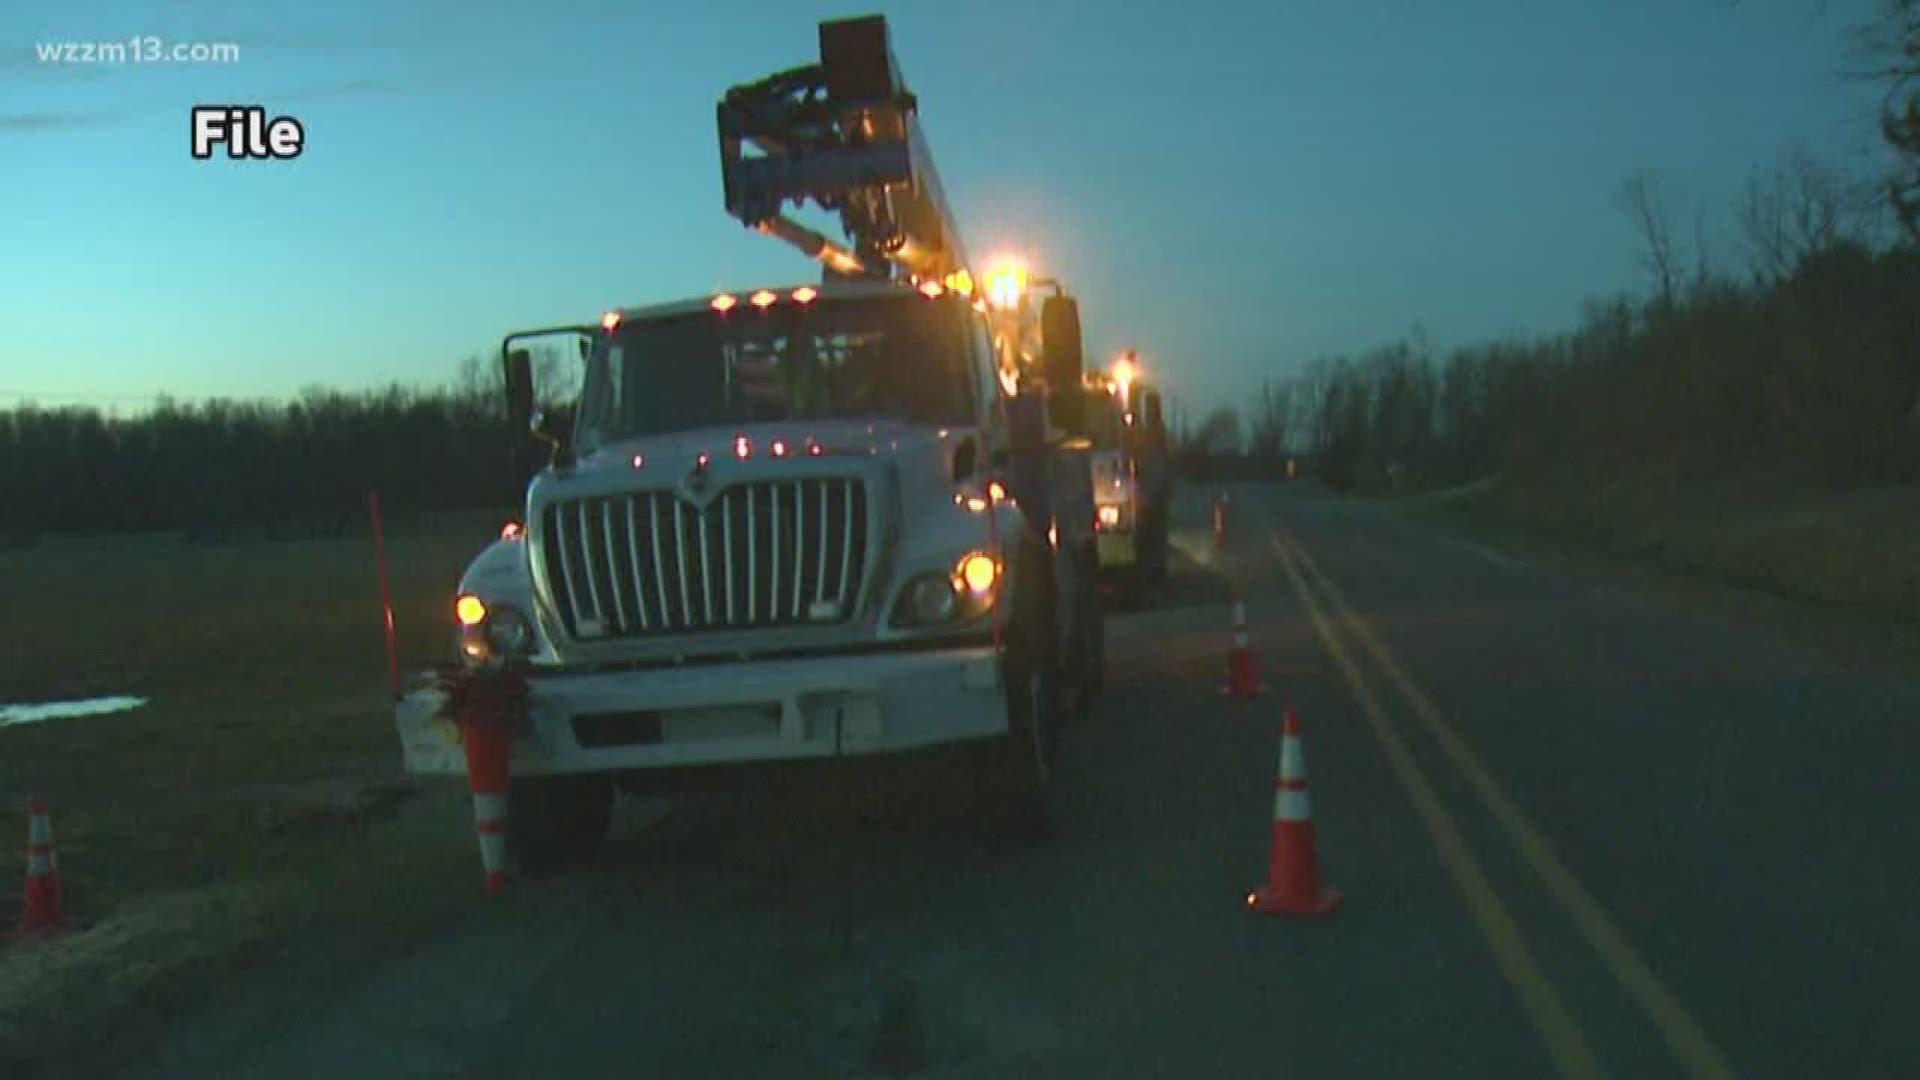 Utility companies prepare for Weekend Winter Storm